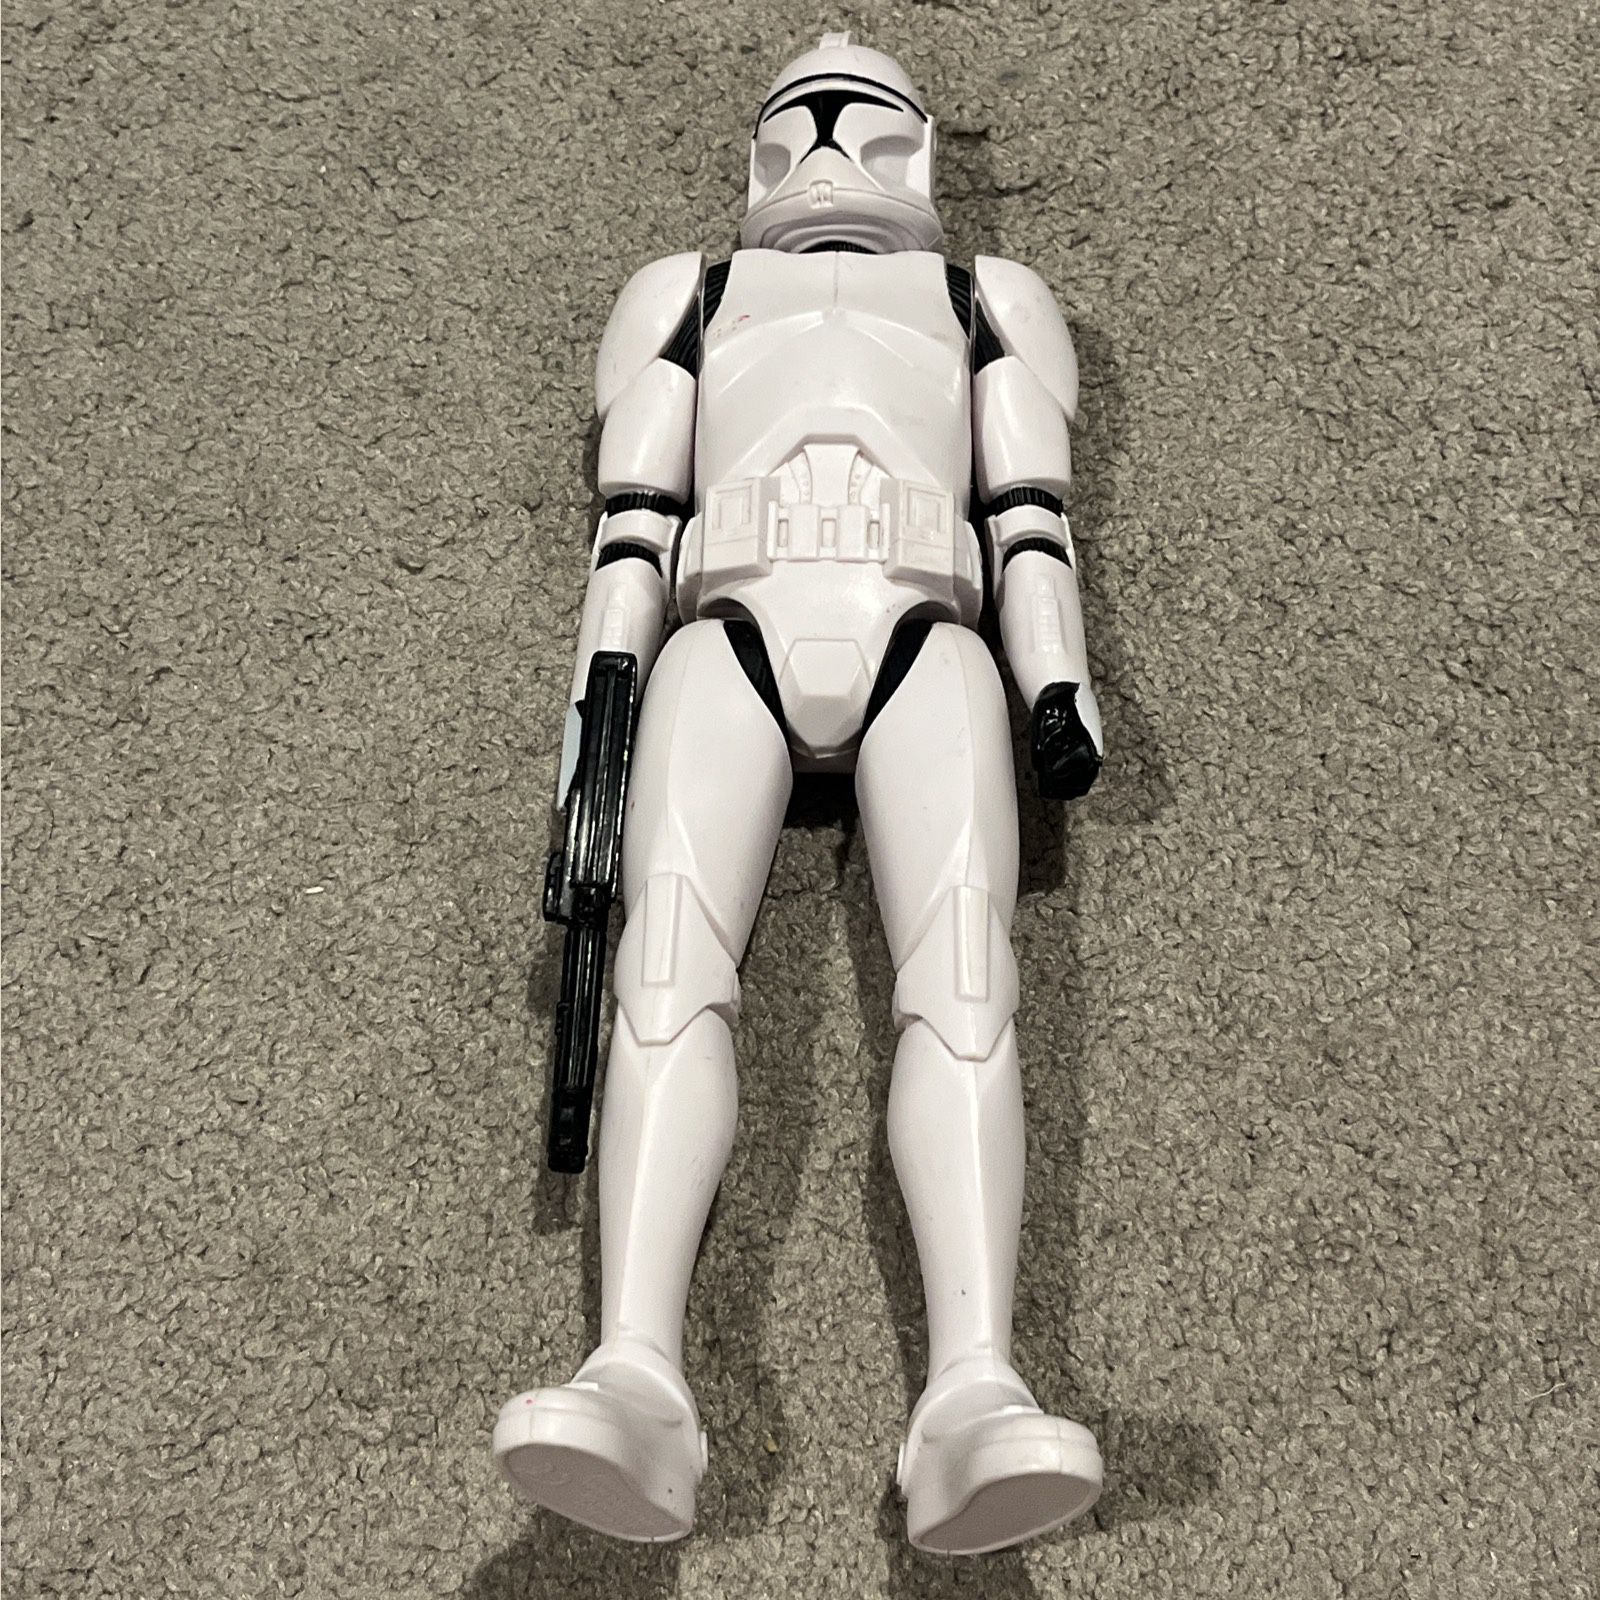 Clone Trooper 12 Inch Action Figure Hasbro Star Wars Attack of the Clones 2012